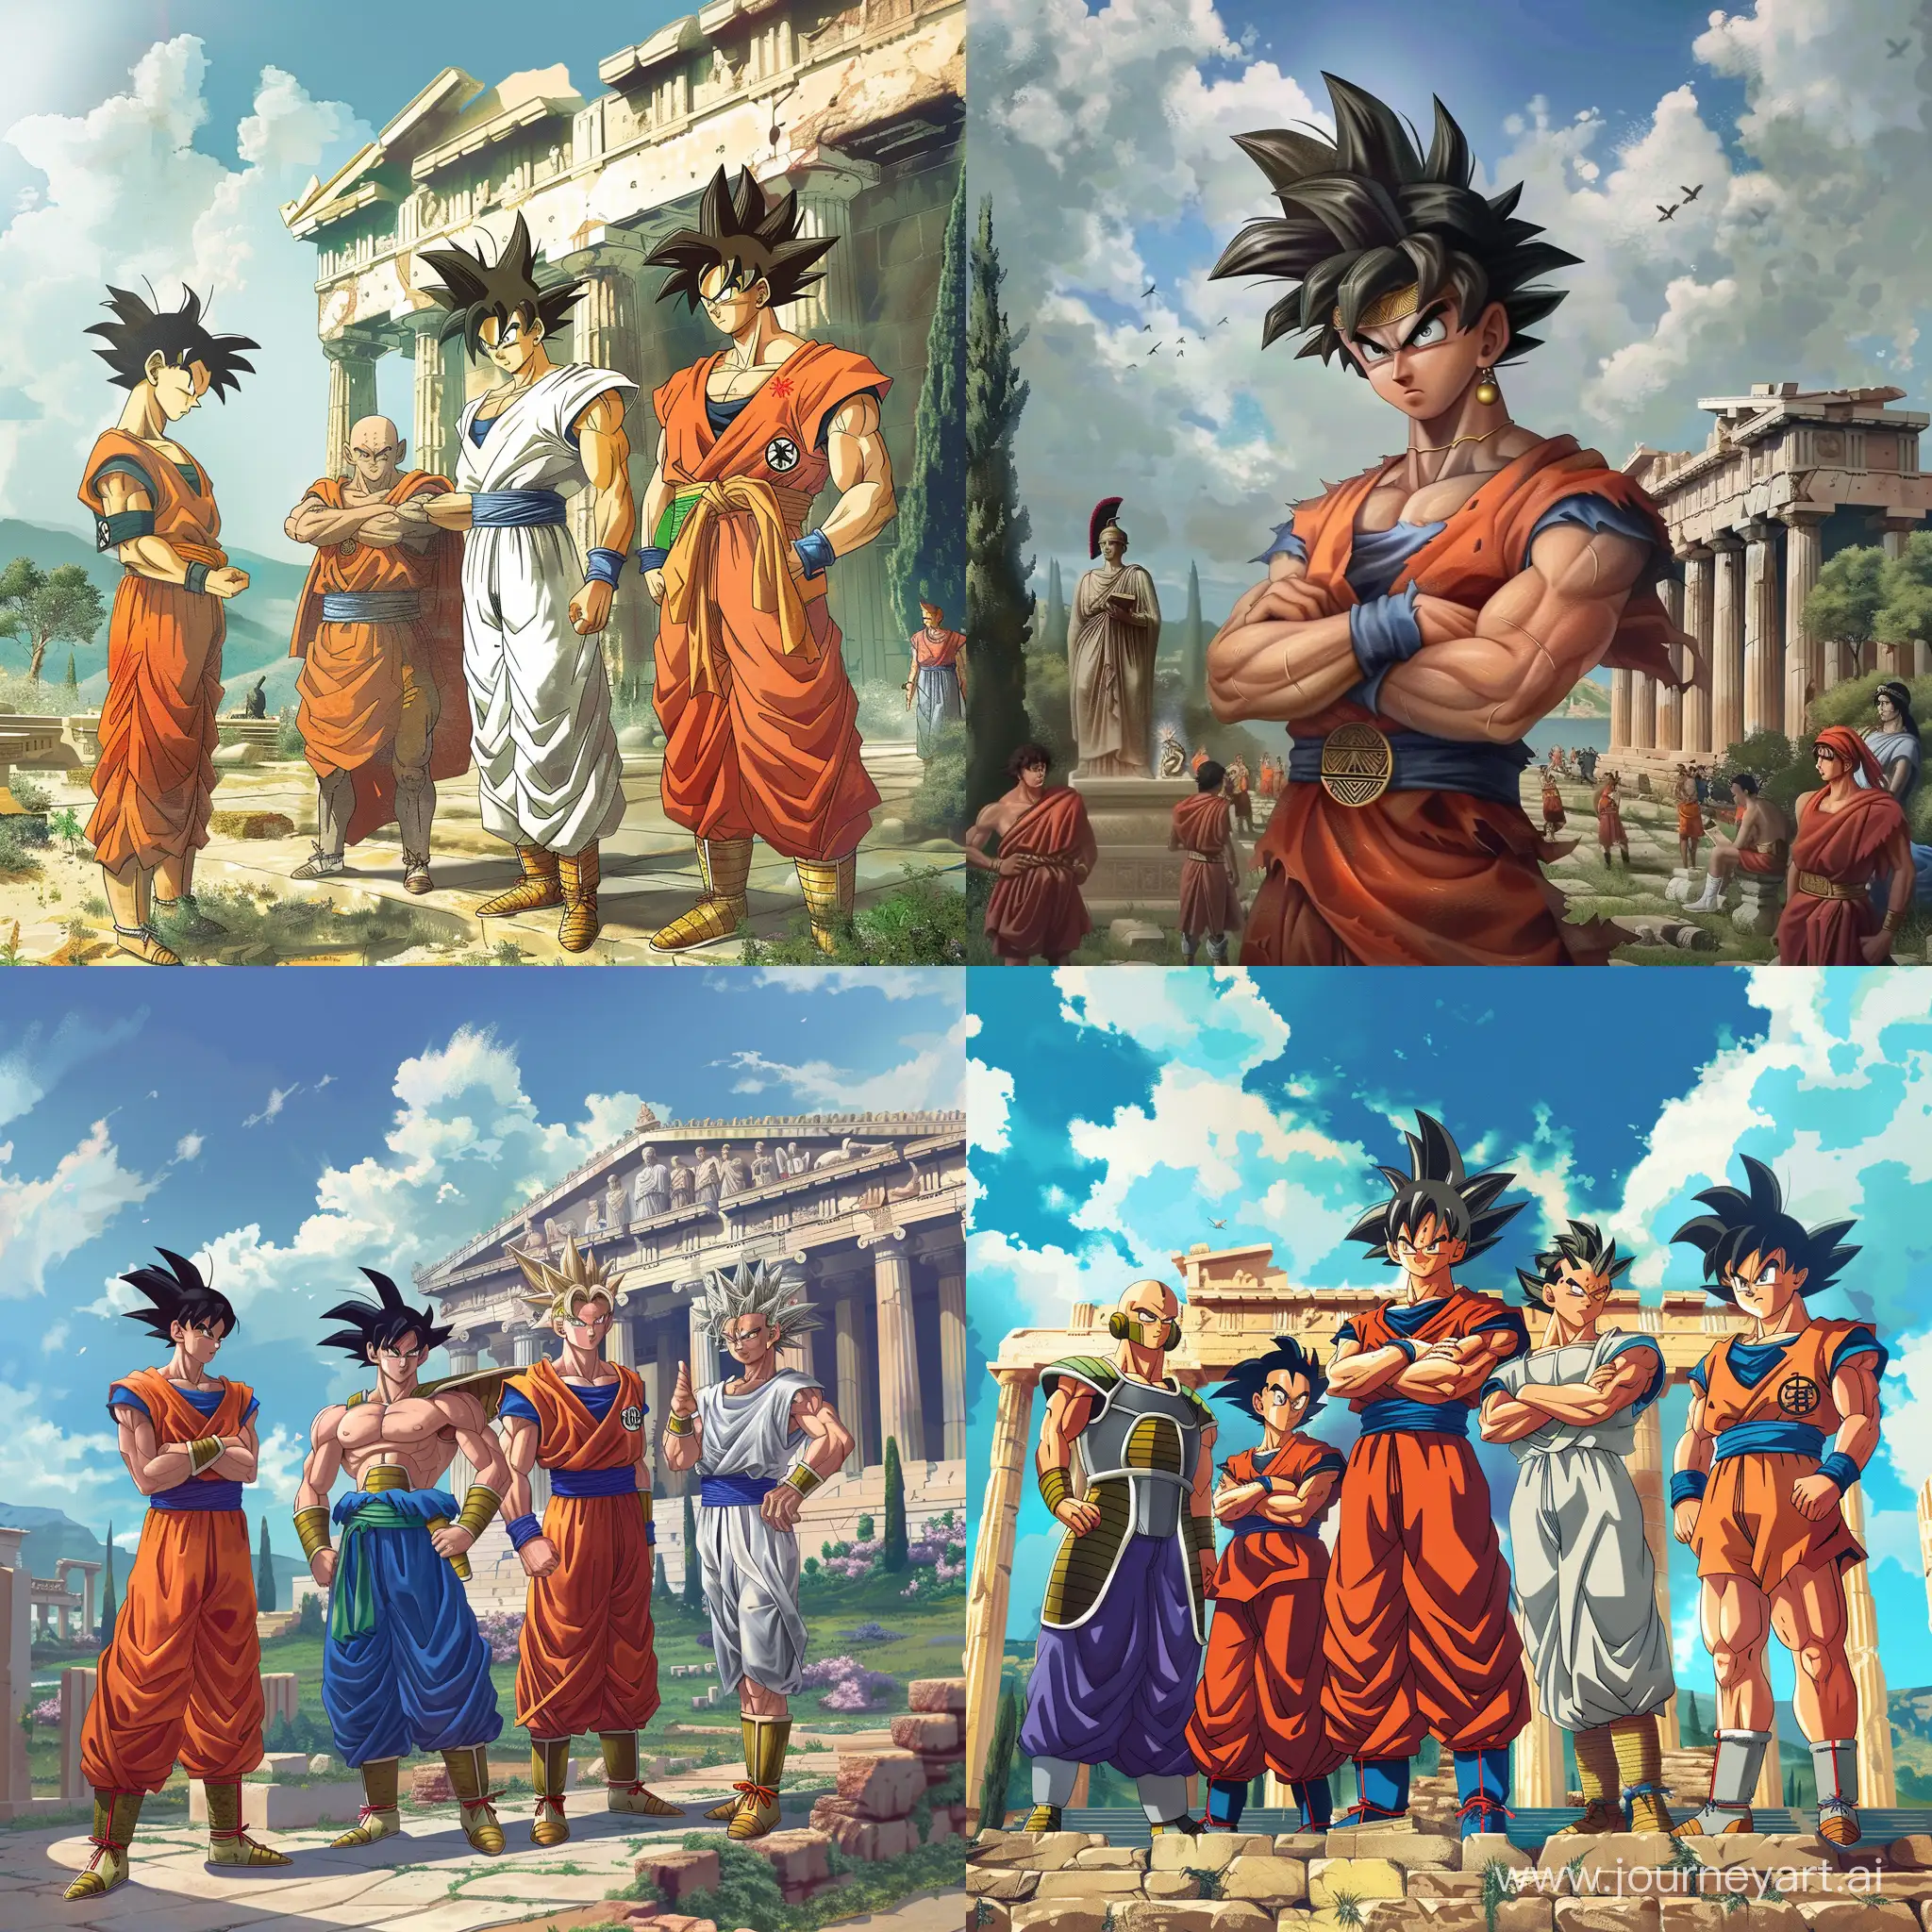 Dragonball-Characters-in-Ancient-Greece-Artwork